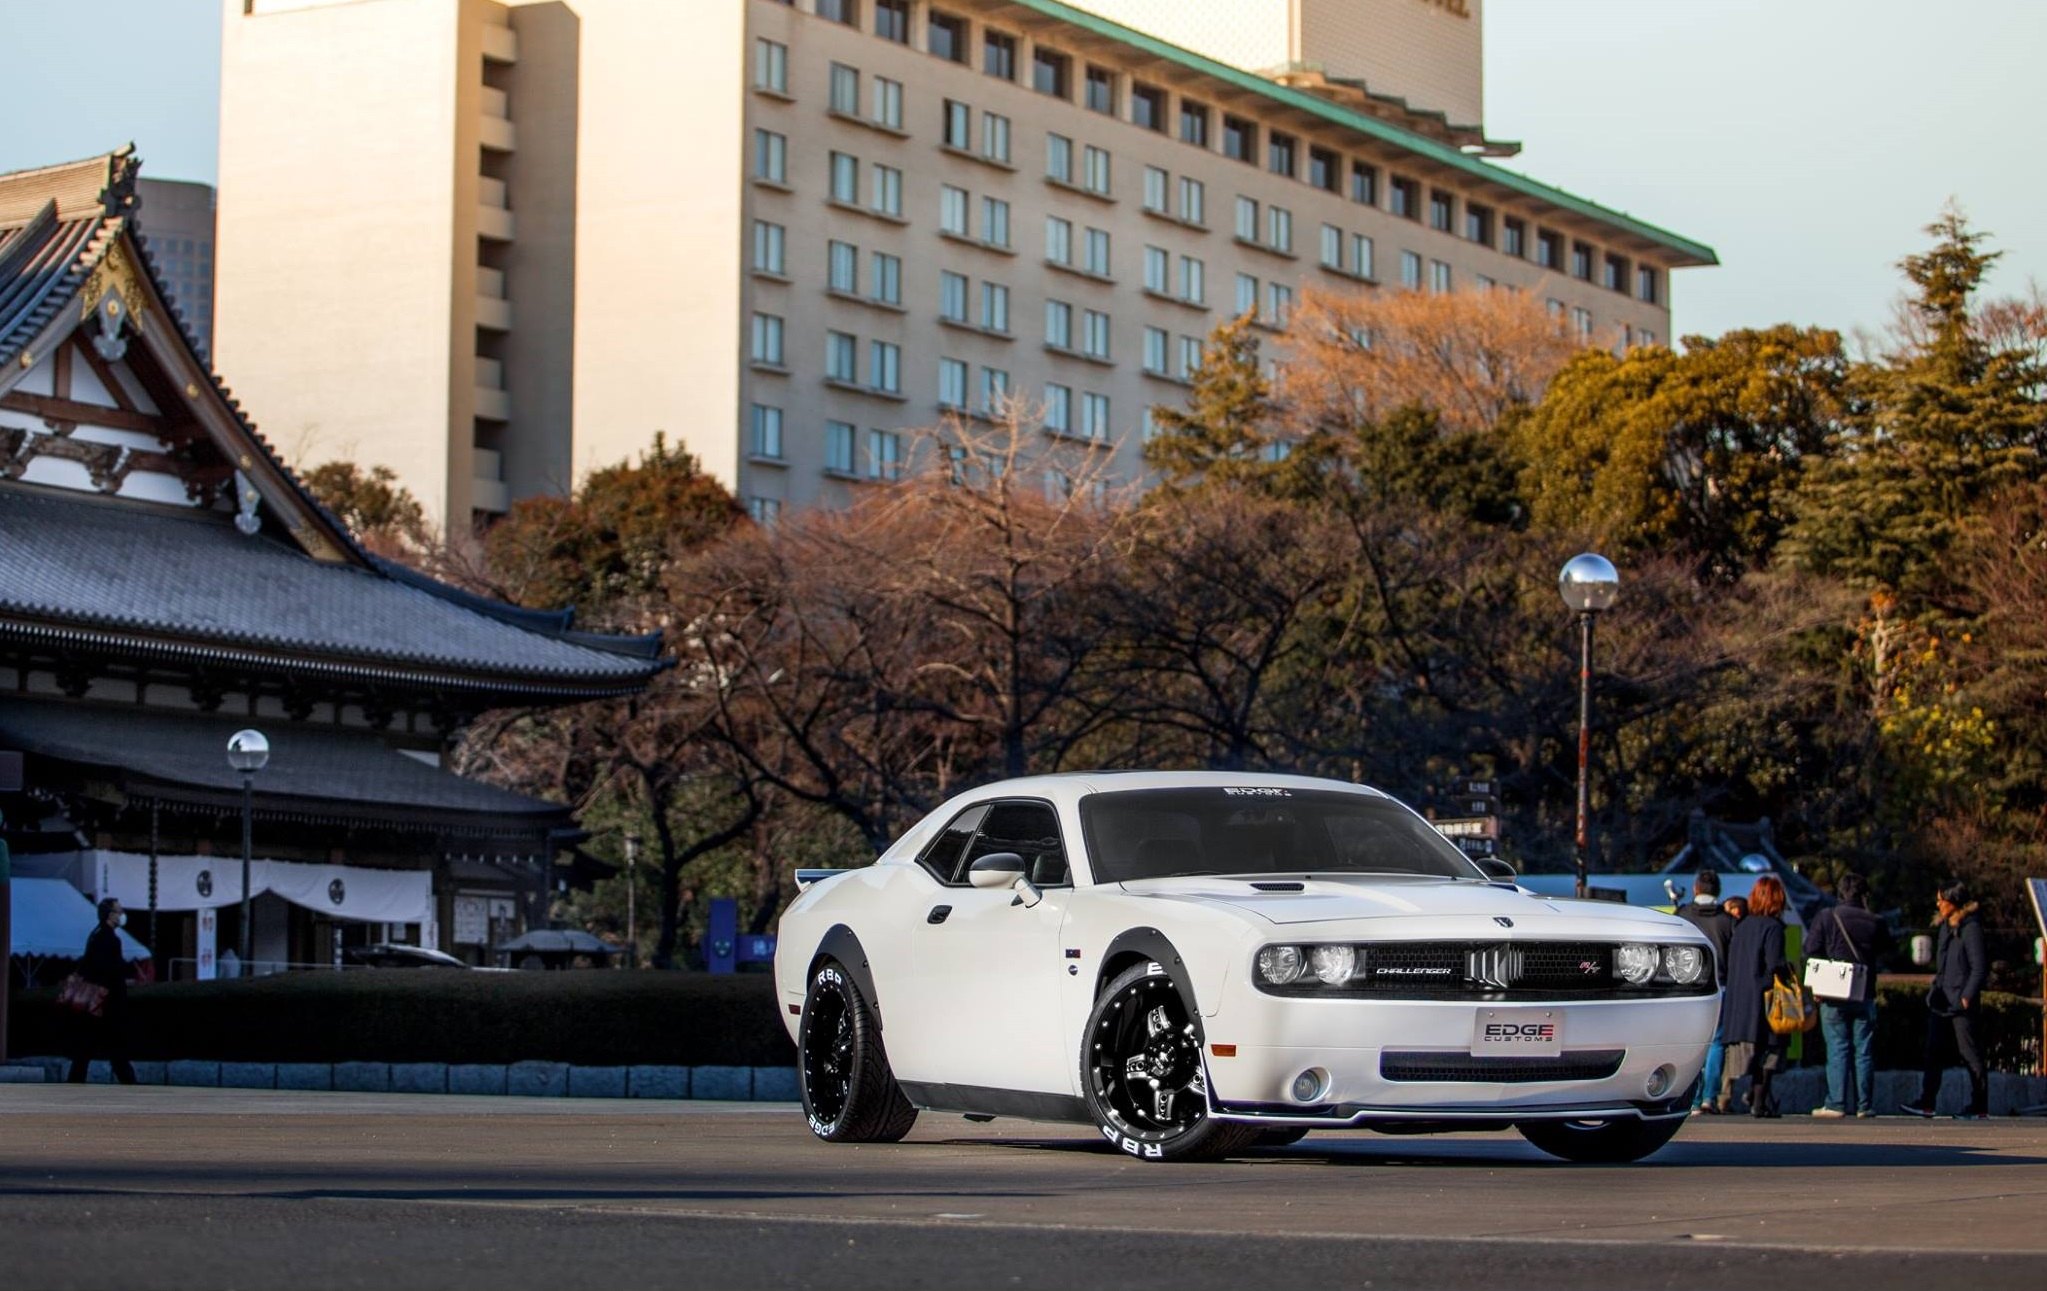 Modern Dodge Challenger With Old School look - Photo by Edge Customs